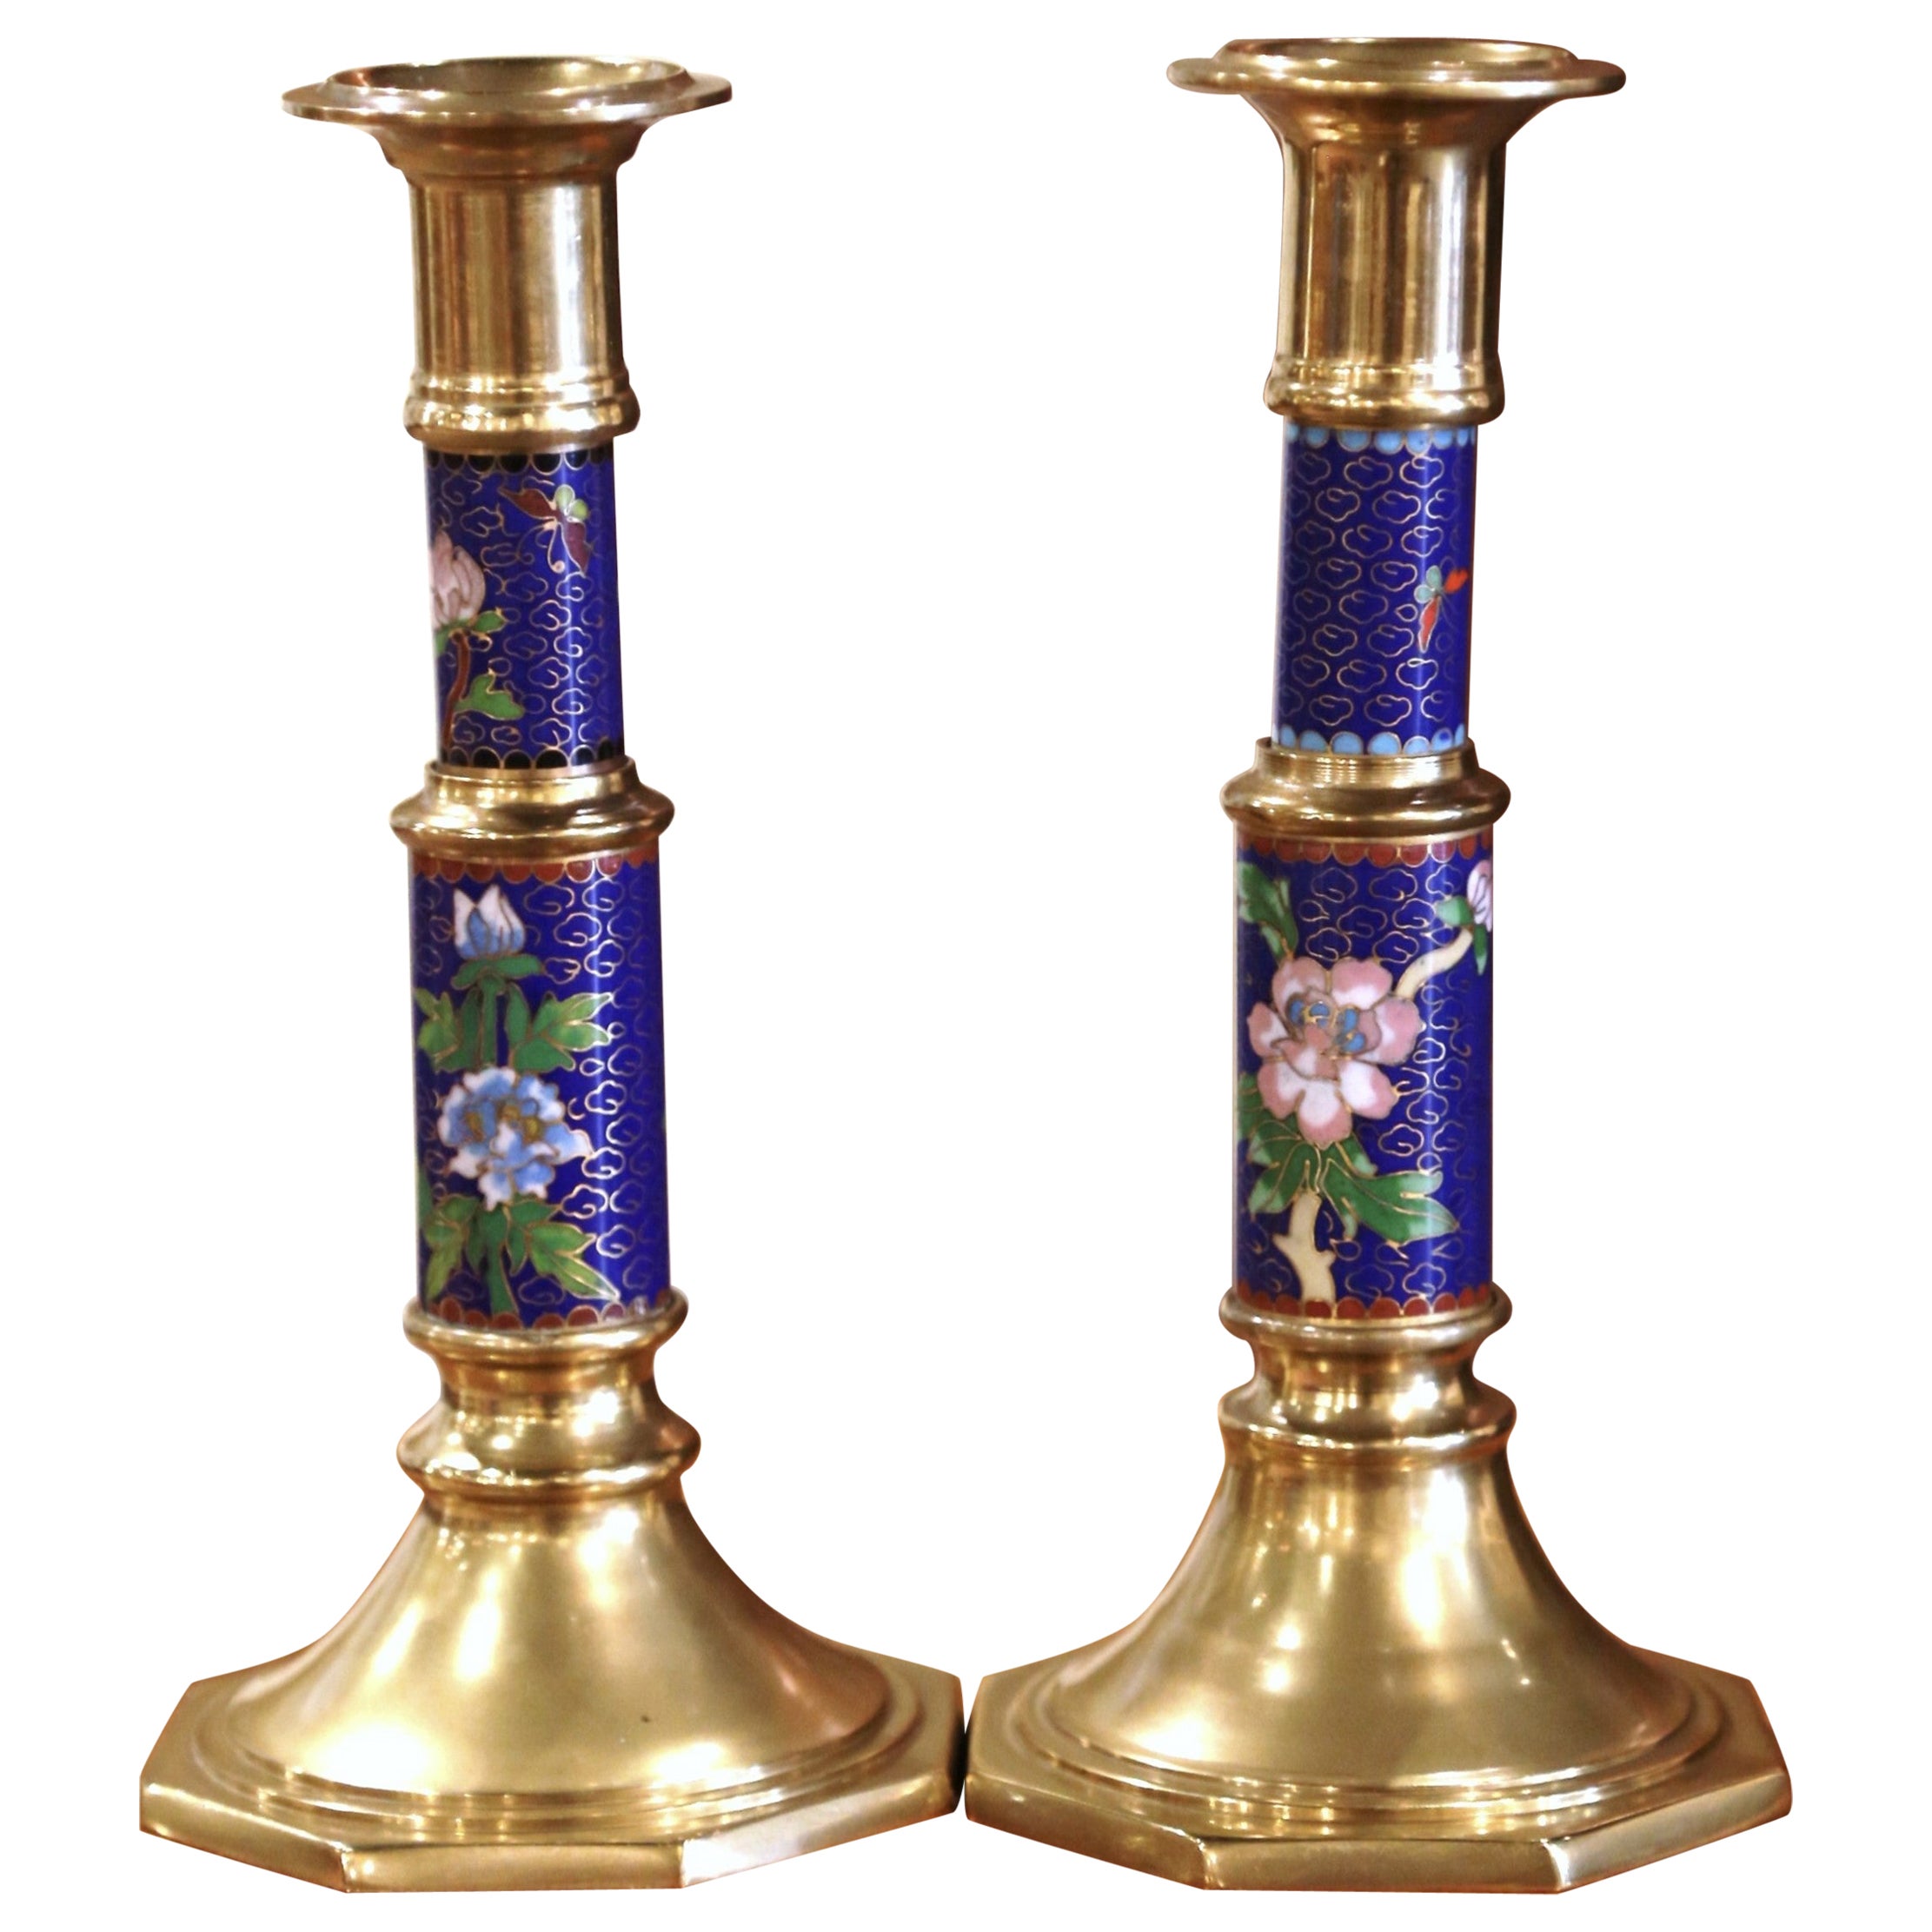 Pair of Vintage Brass Champleve Candle Holders with Floral & Leaf Motifs For Sale